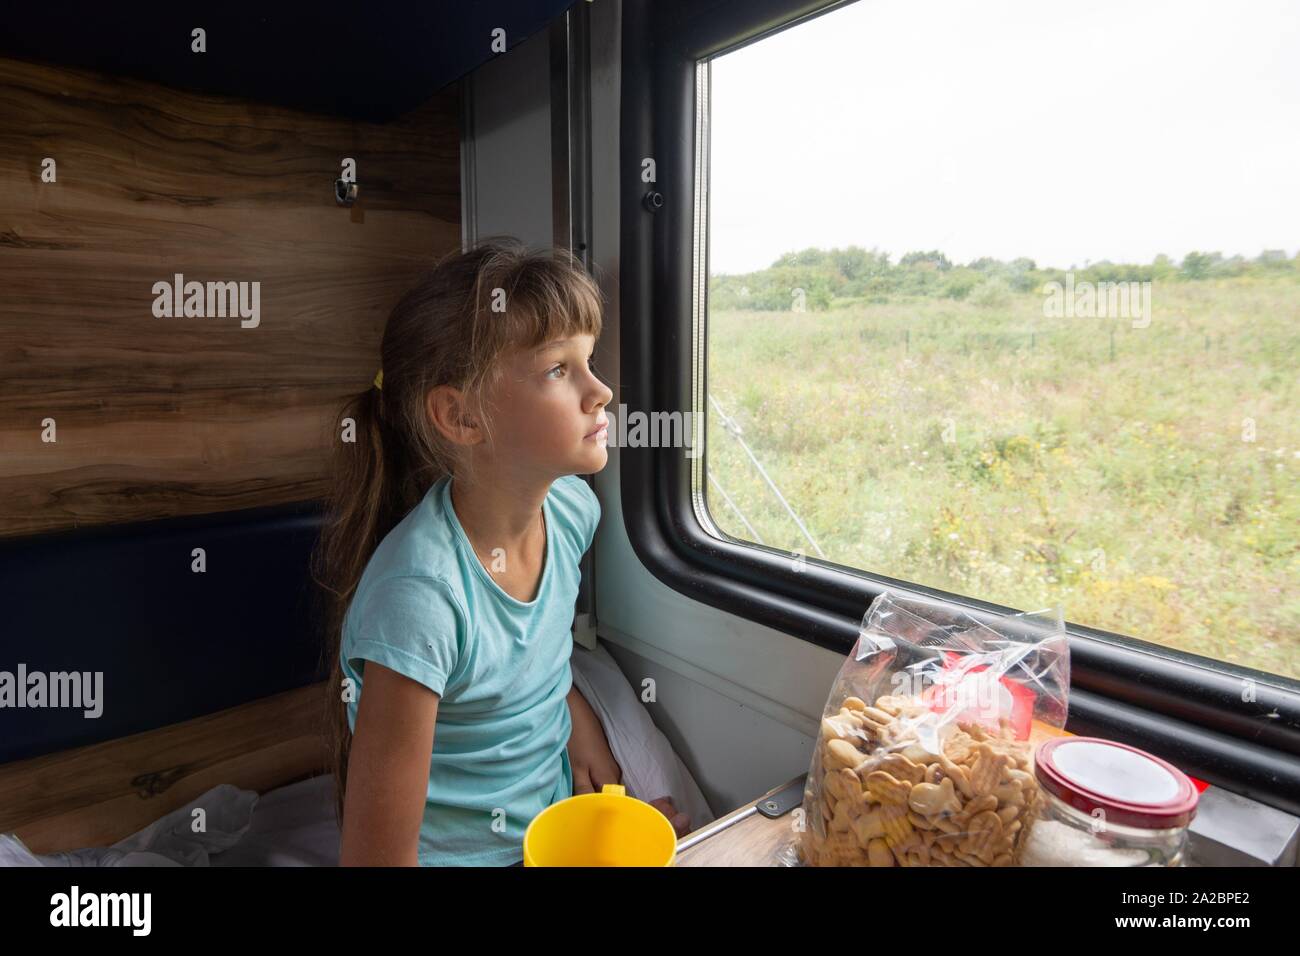 Girl sitting in a reserved seat wagon looks tiredly out the window. Stock Photo